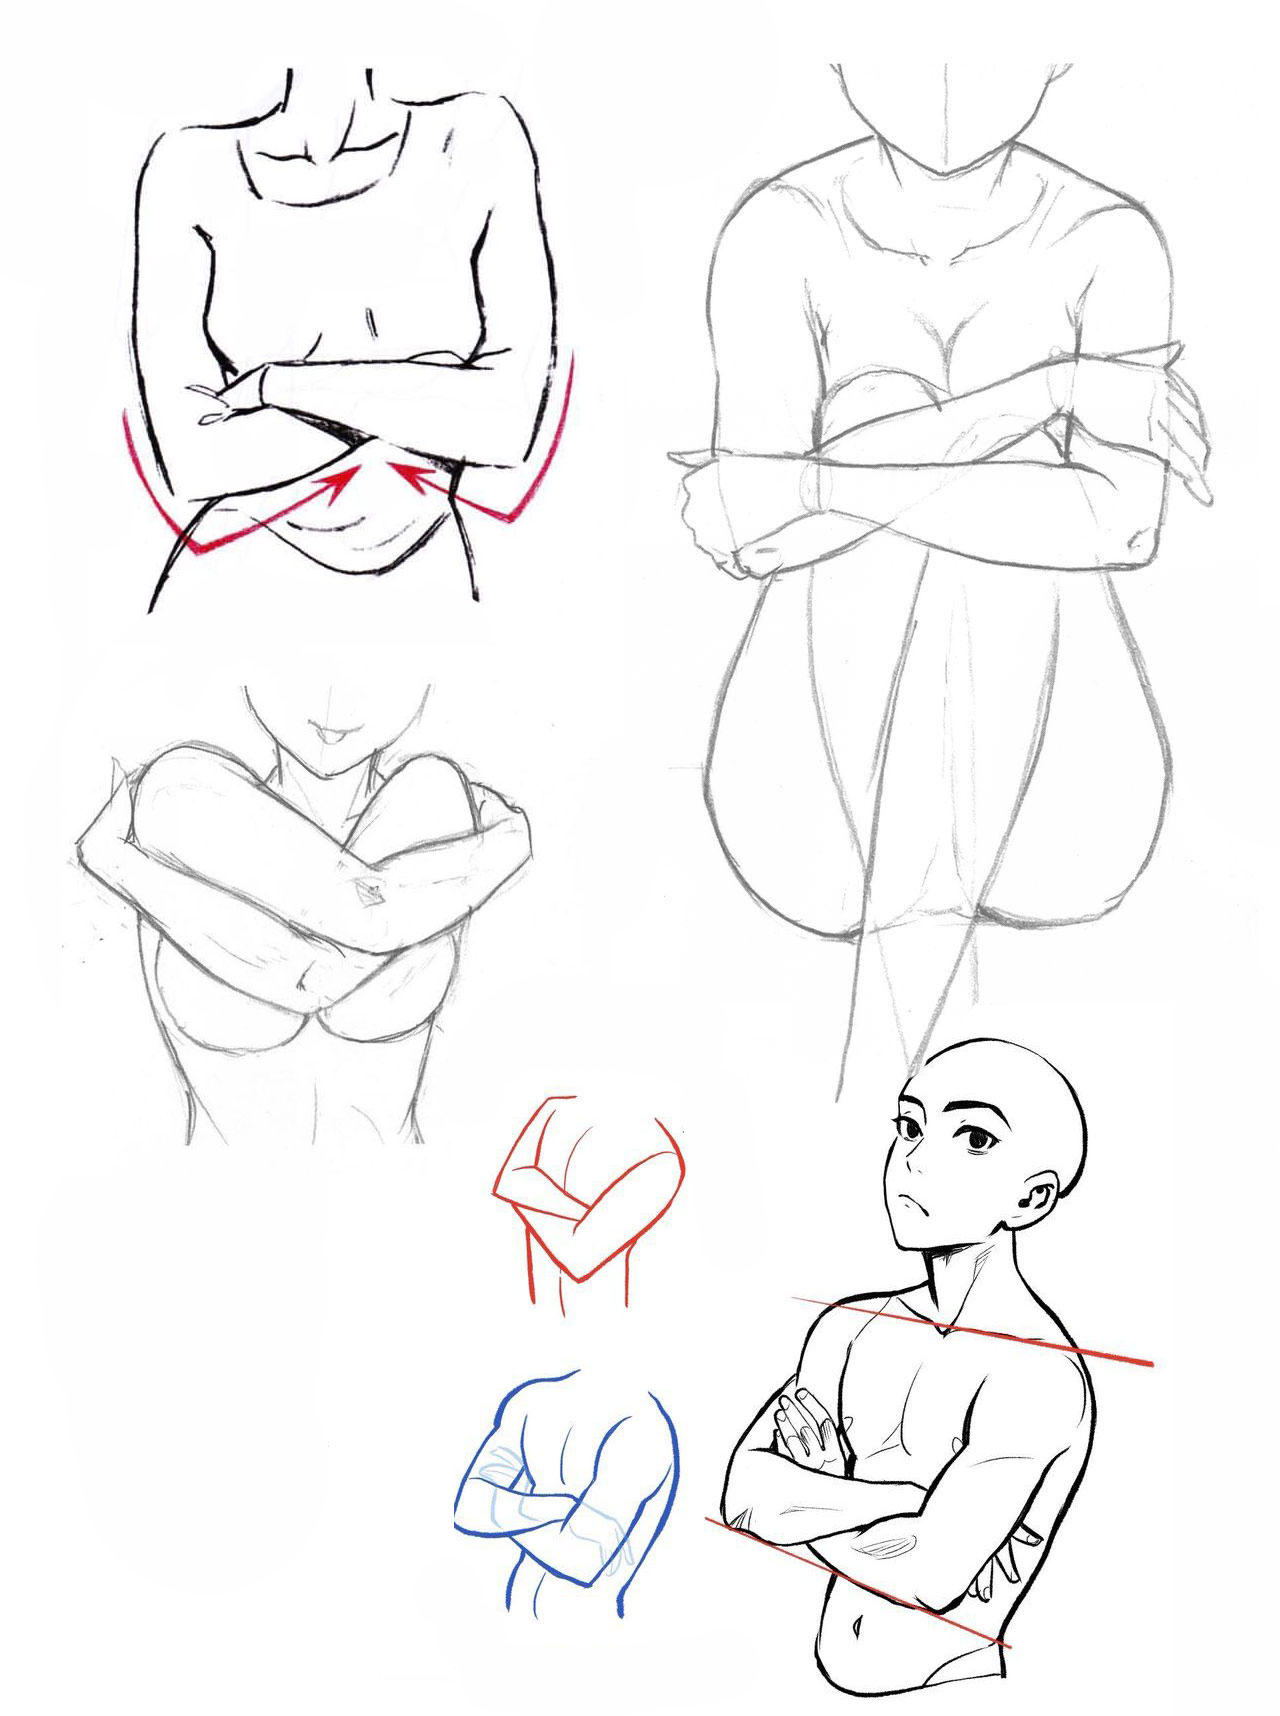 Arms crossed Drawing Reference and Sketches for Artists